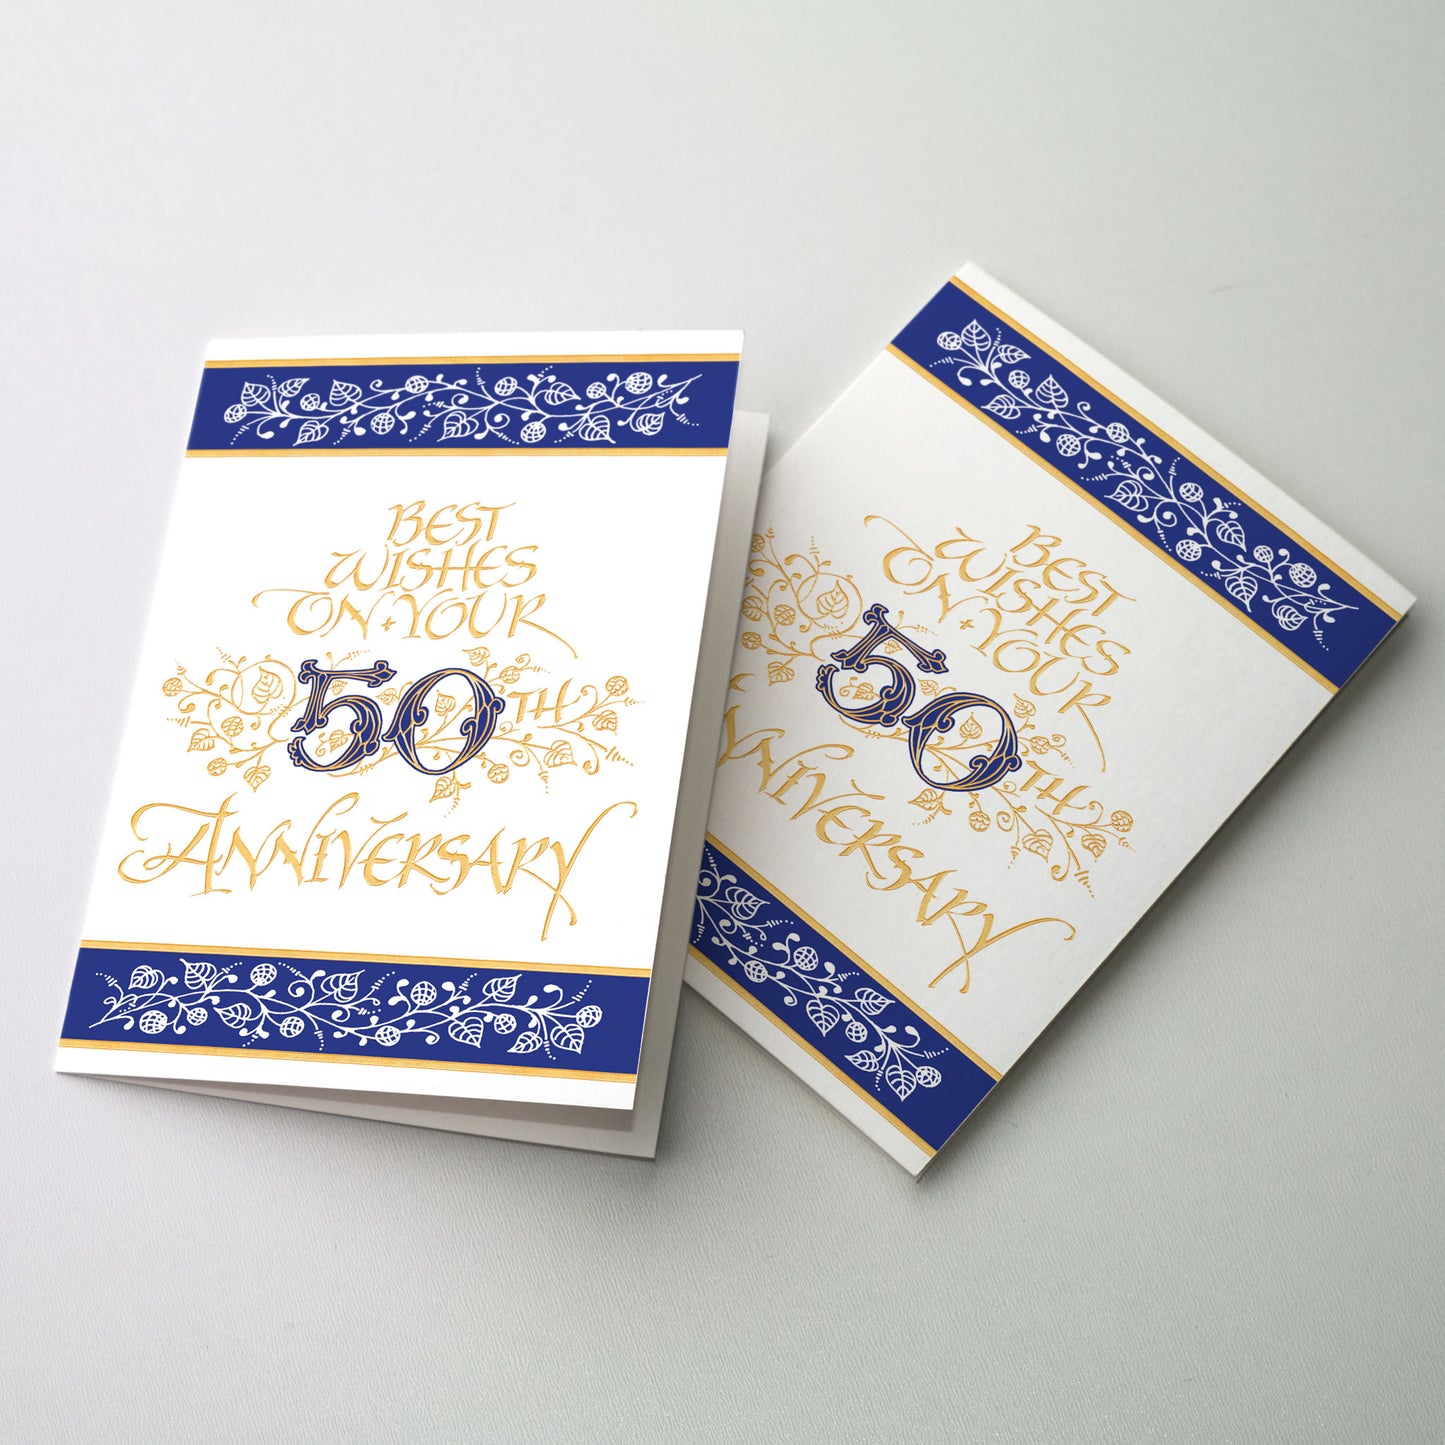 Best Wishes on Your 50th Anniversary - General Anniversary Card